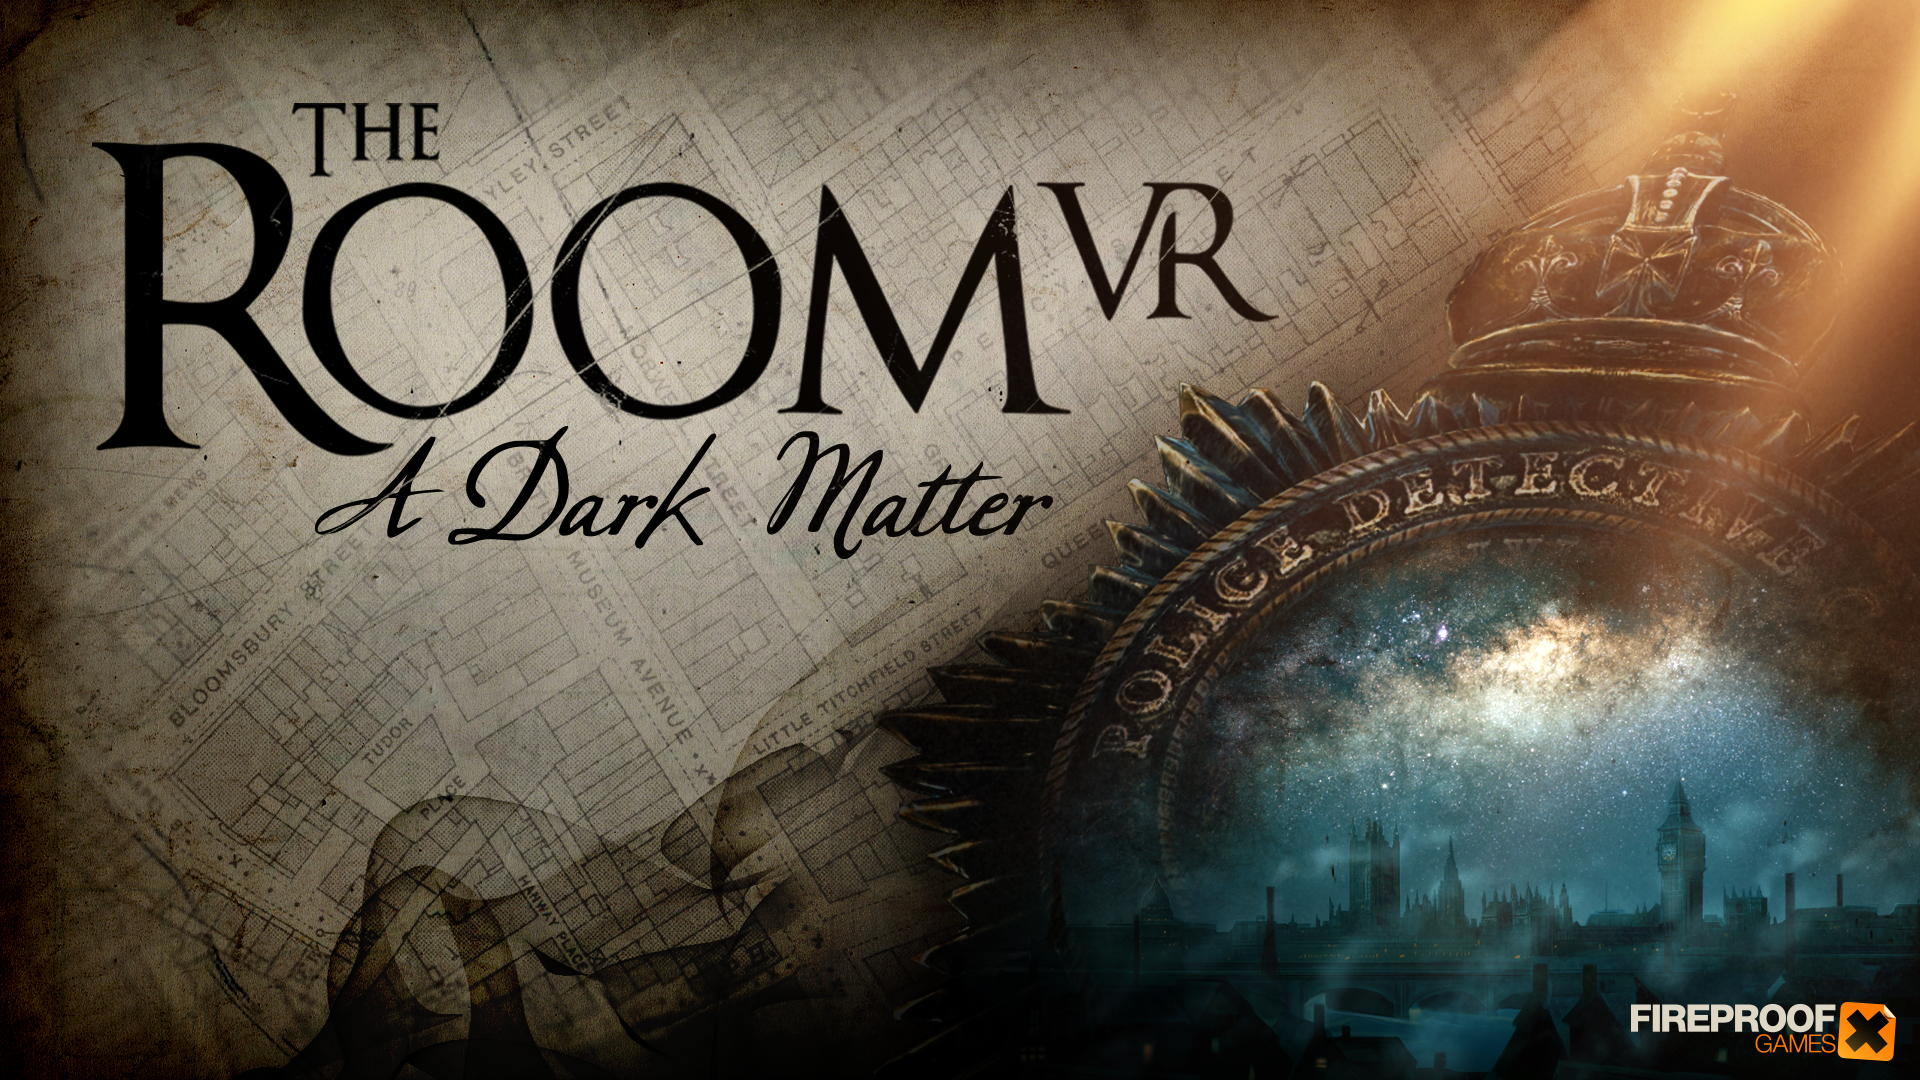 The Room VR: A Dark Matter on Meta Quest